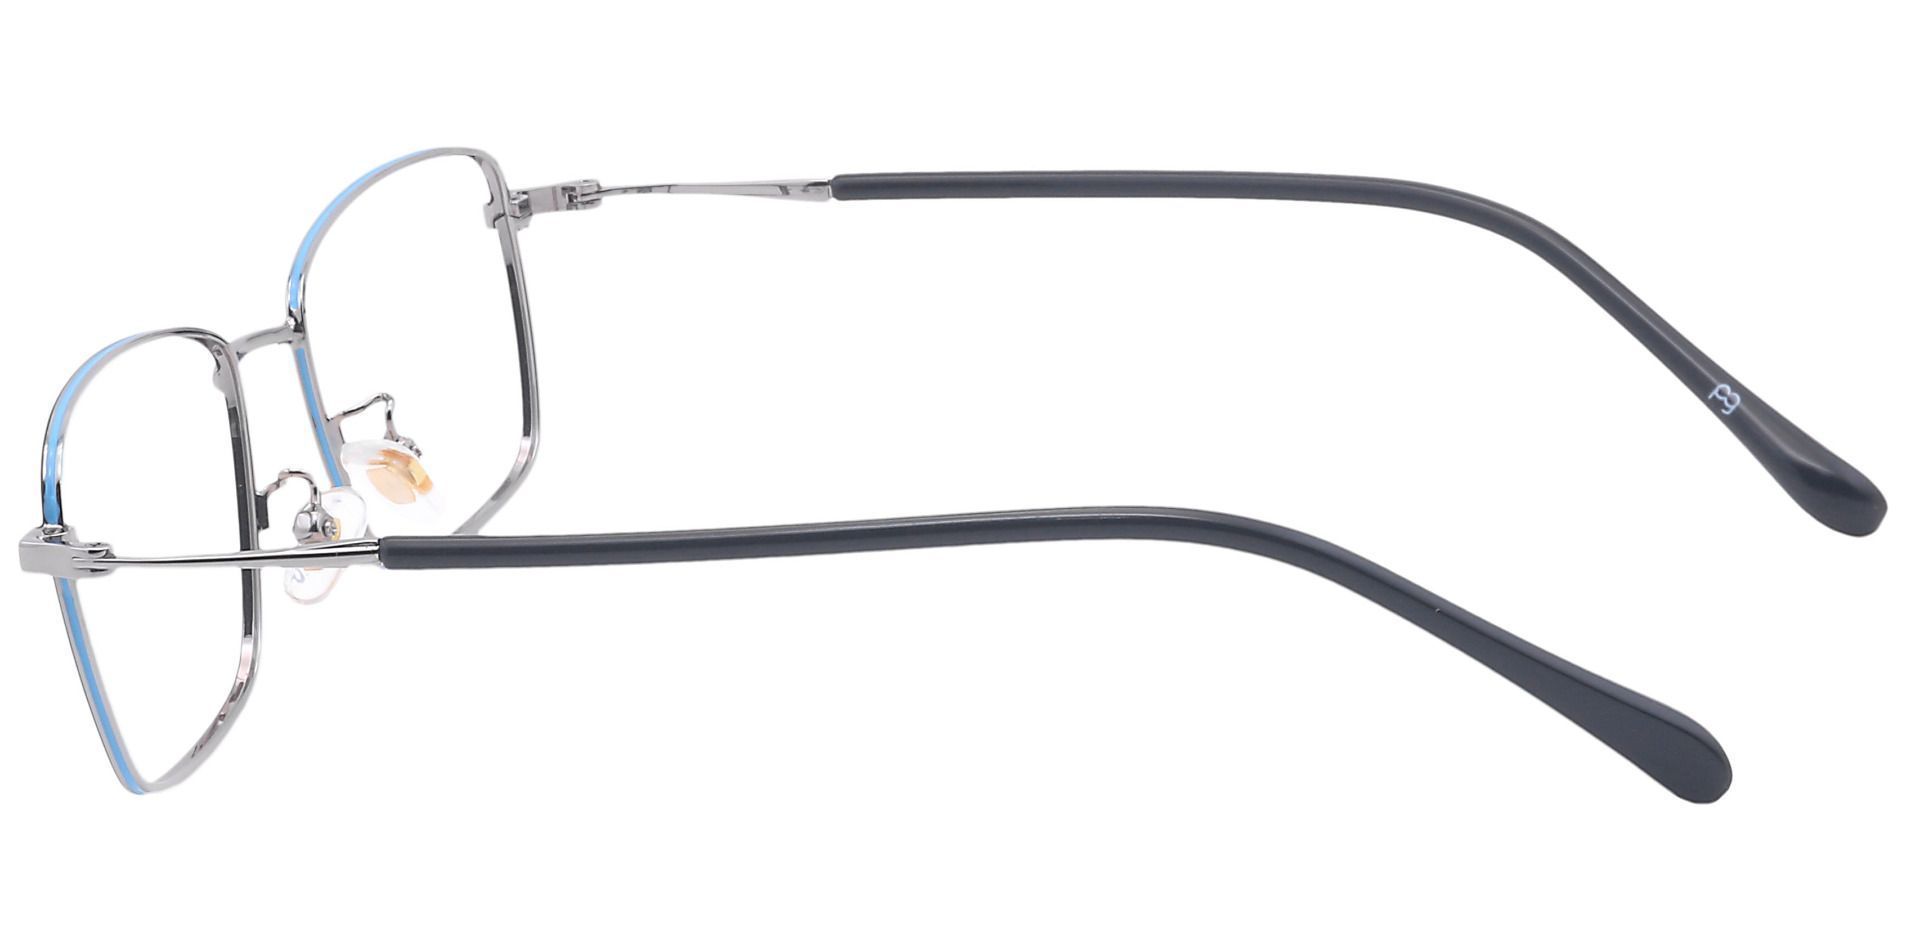 Diaz Rectangle Lined Bifocal Glasses - Clear